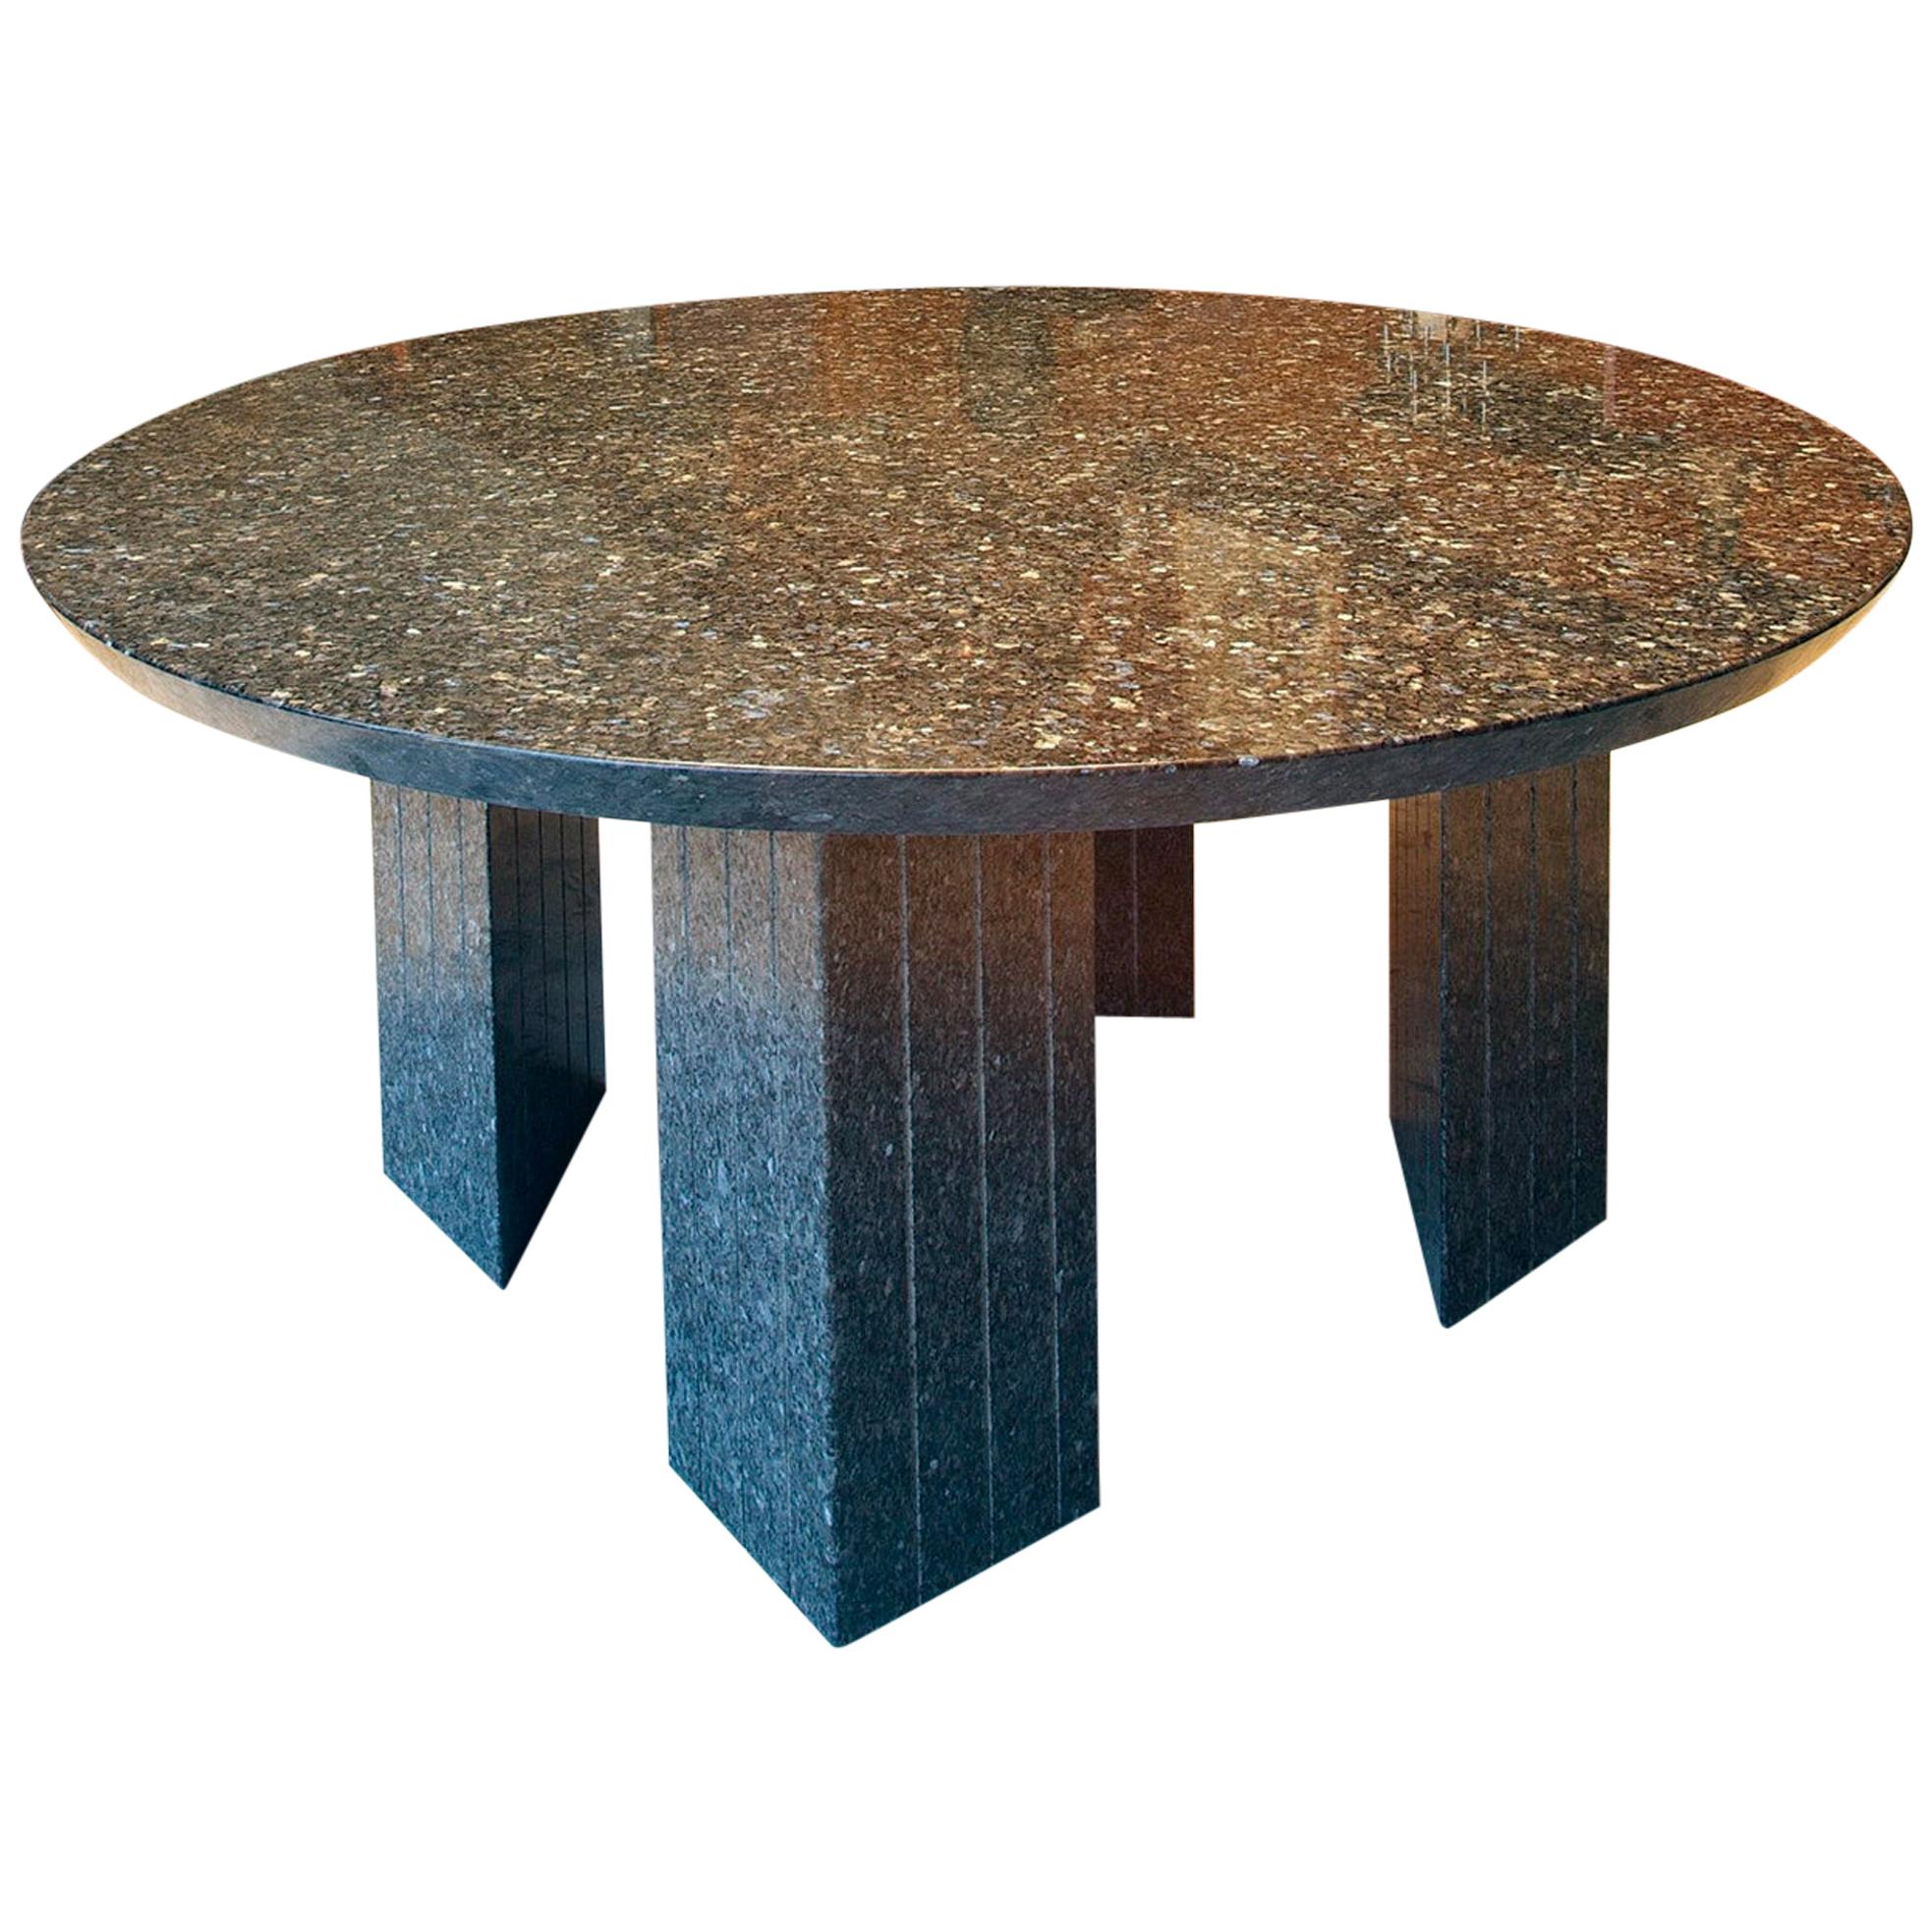 Large Round Table in Granite 10 Seats For Sale